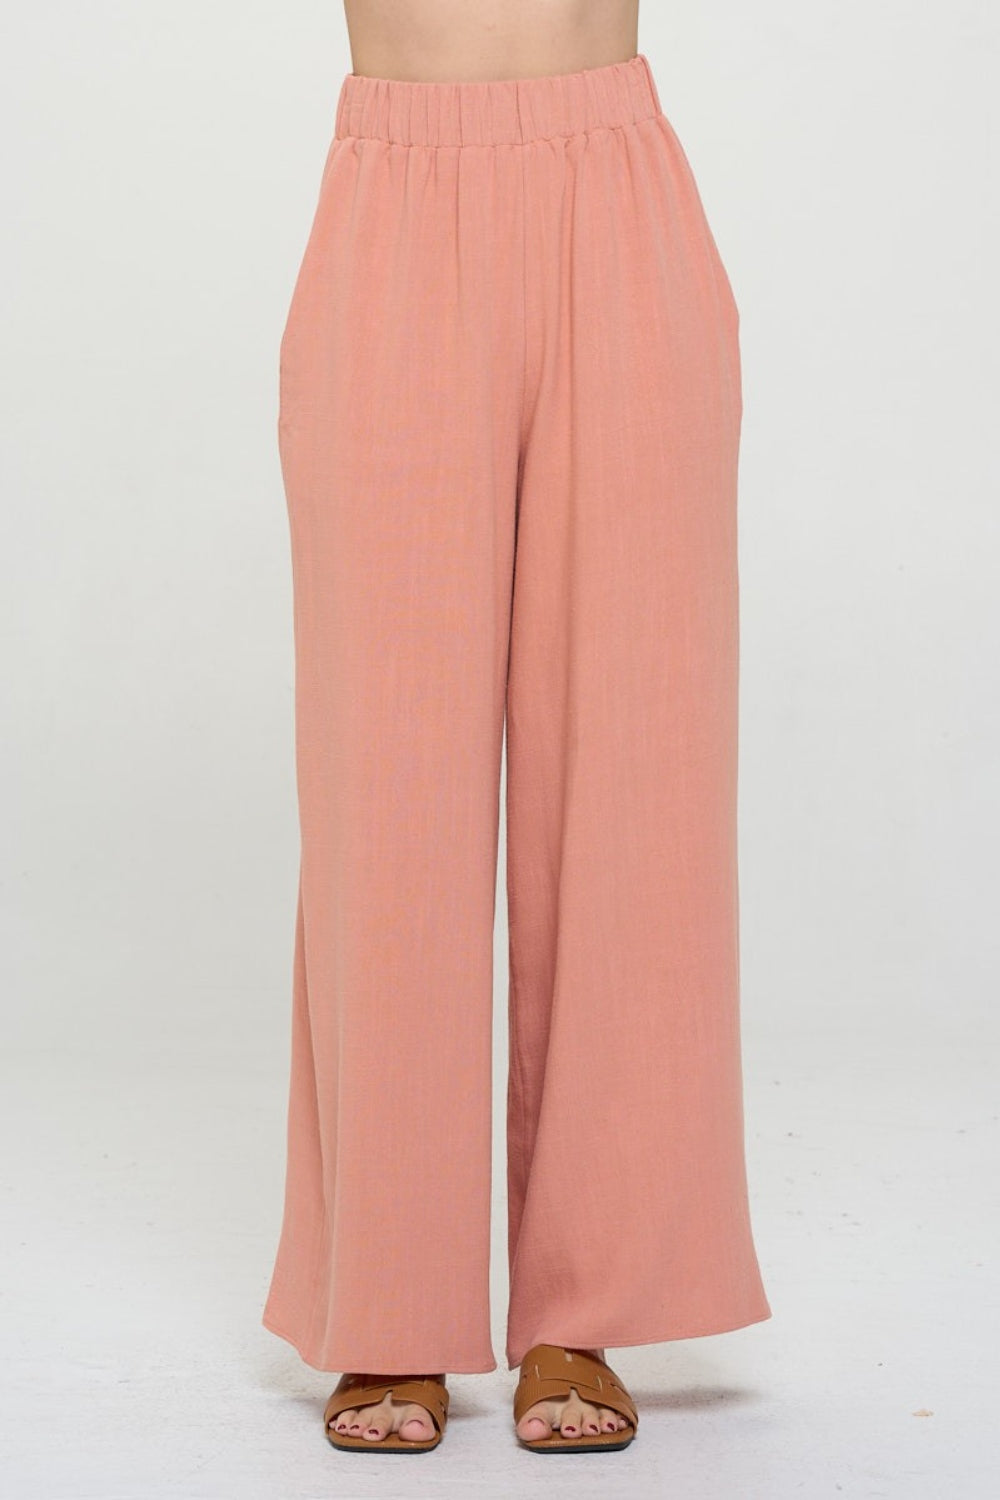 These linen wide leg pants are stylish and functional with the added convenience of pockets. Made from breathable linen fabric, they are perfect for keeping cool and comfortable during warm weather. The wide leg design adds a touch of elegance while allowing for ease of movement.  S  - L